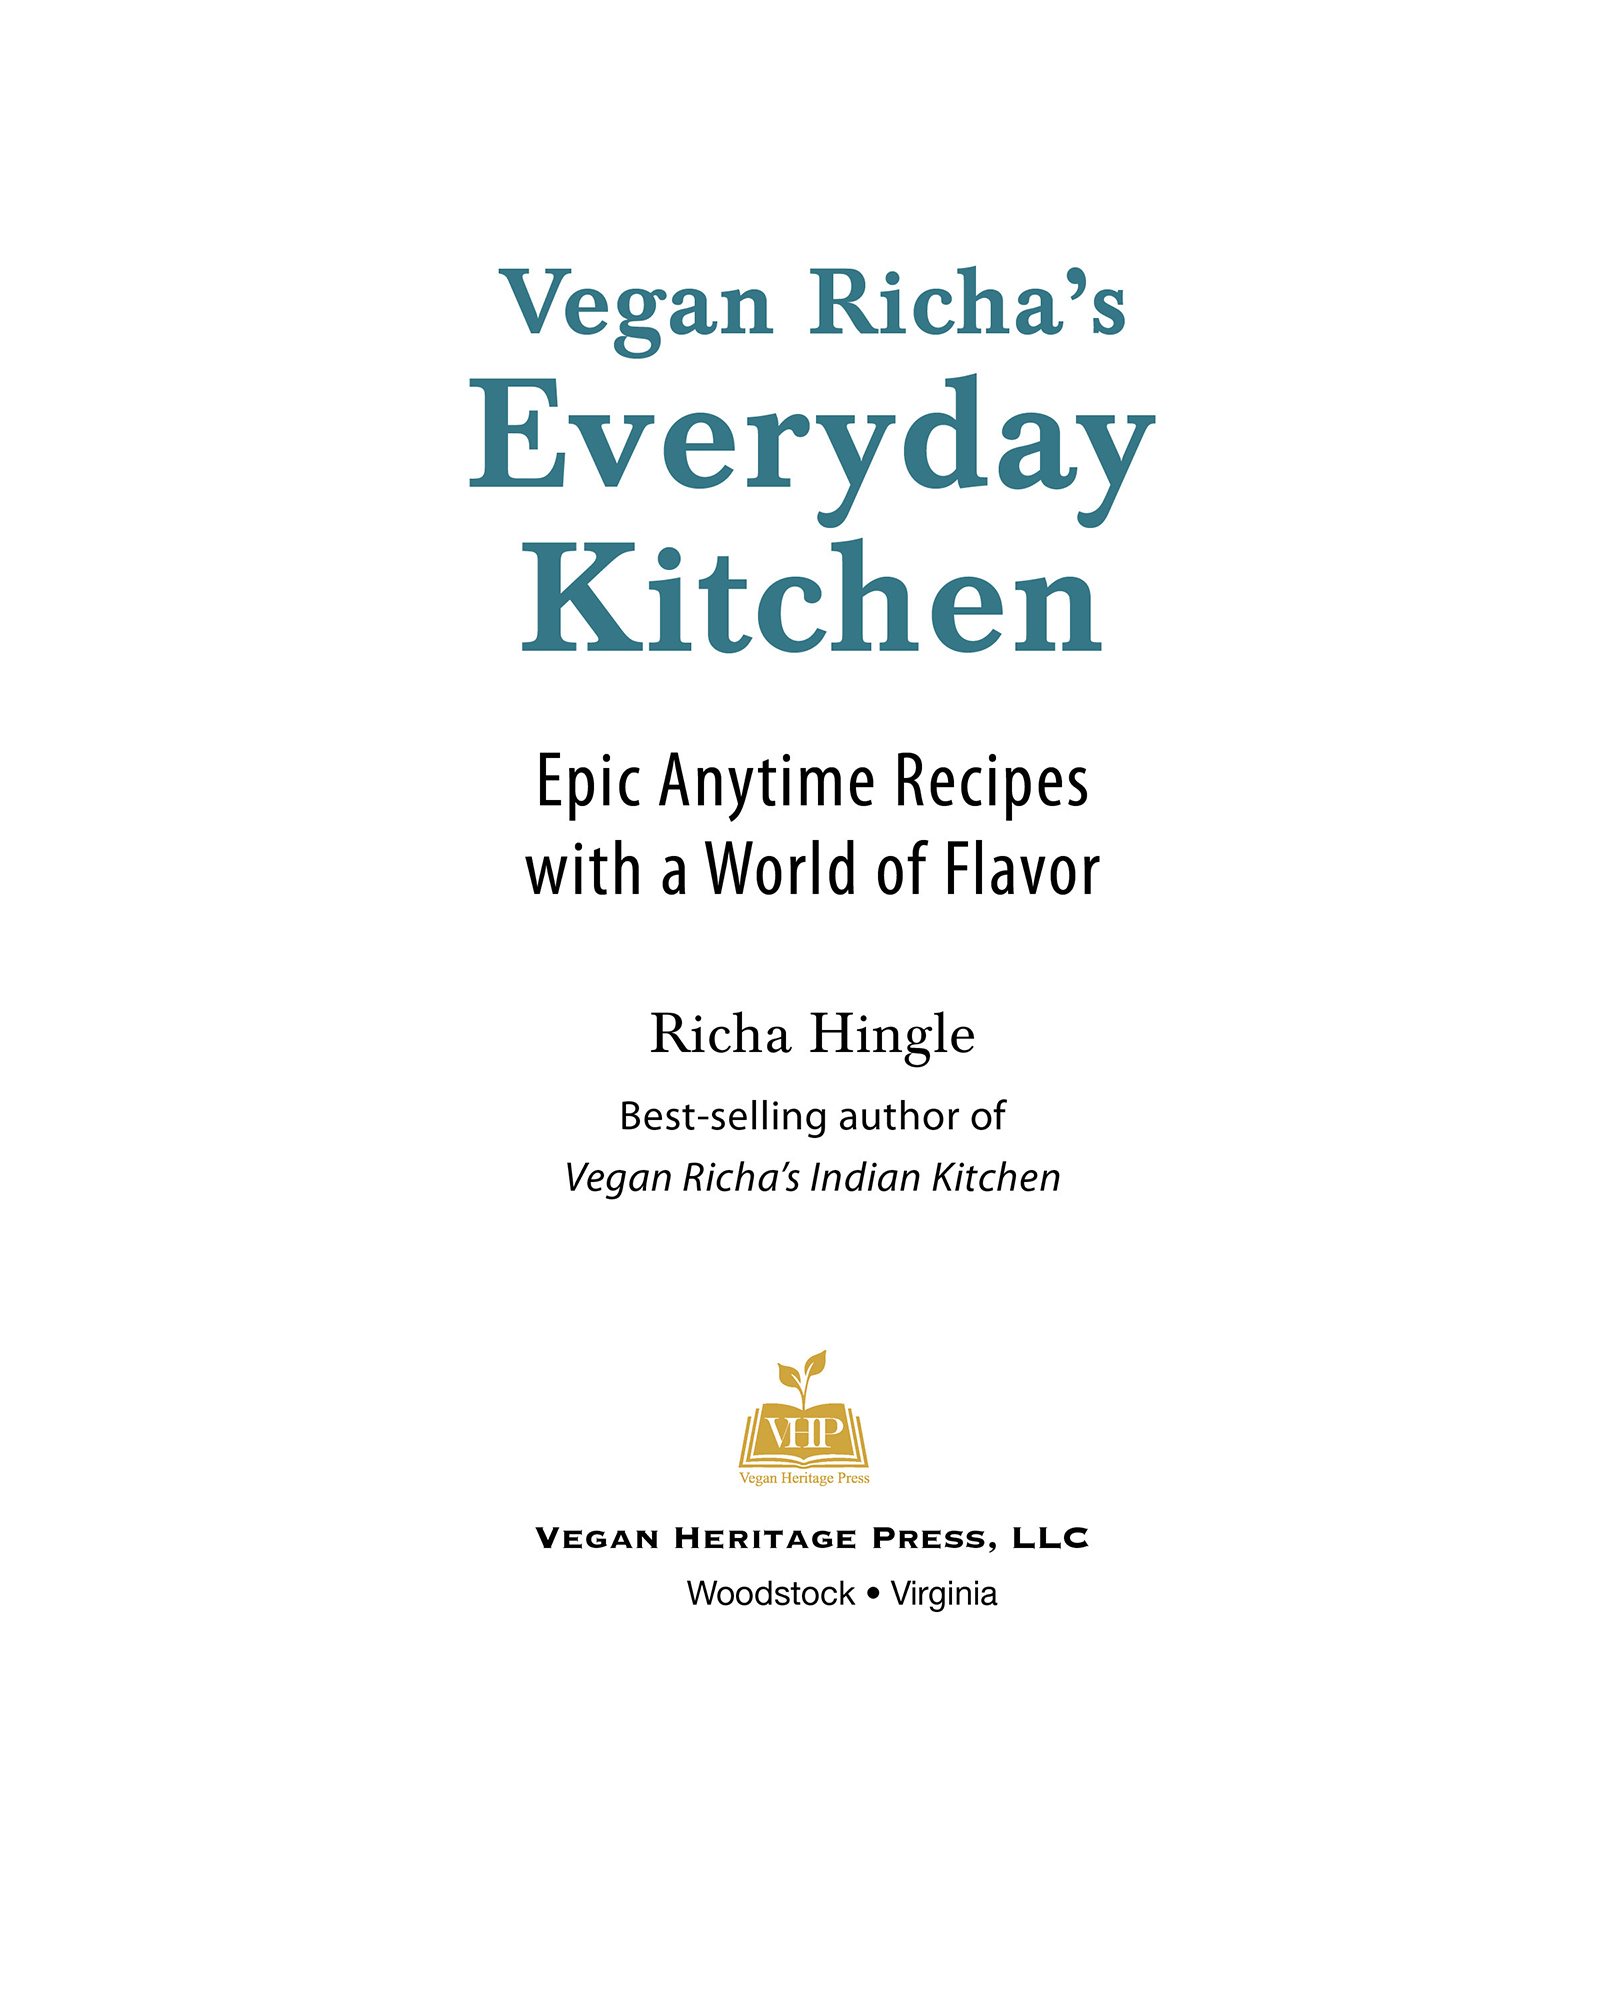 Vegan Richas Everyday Kitchen Epic Anytime Recipes with a World of Flavor by - photo 2